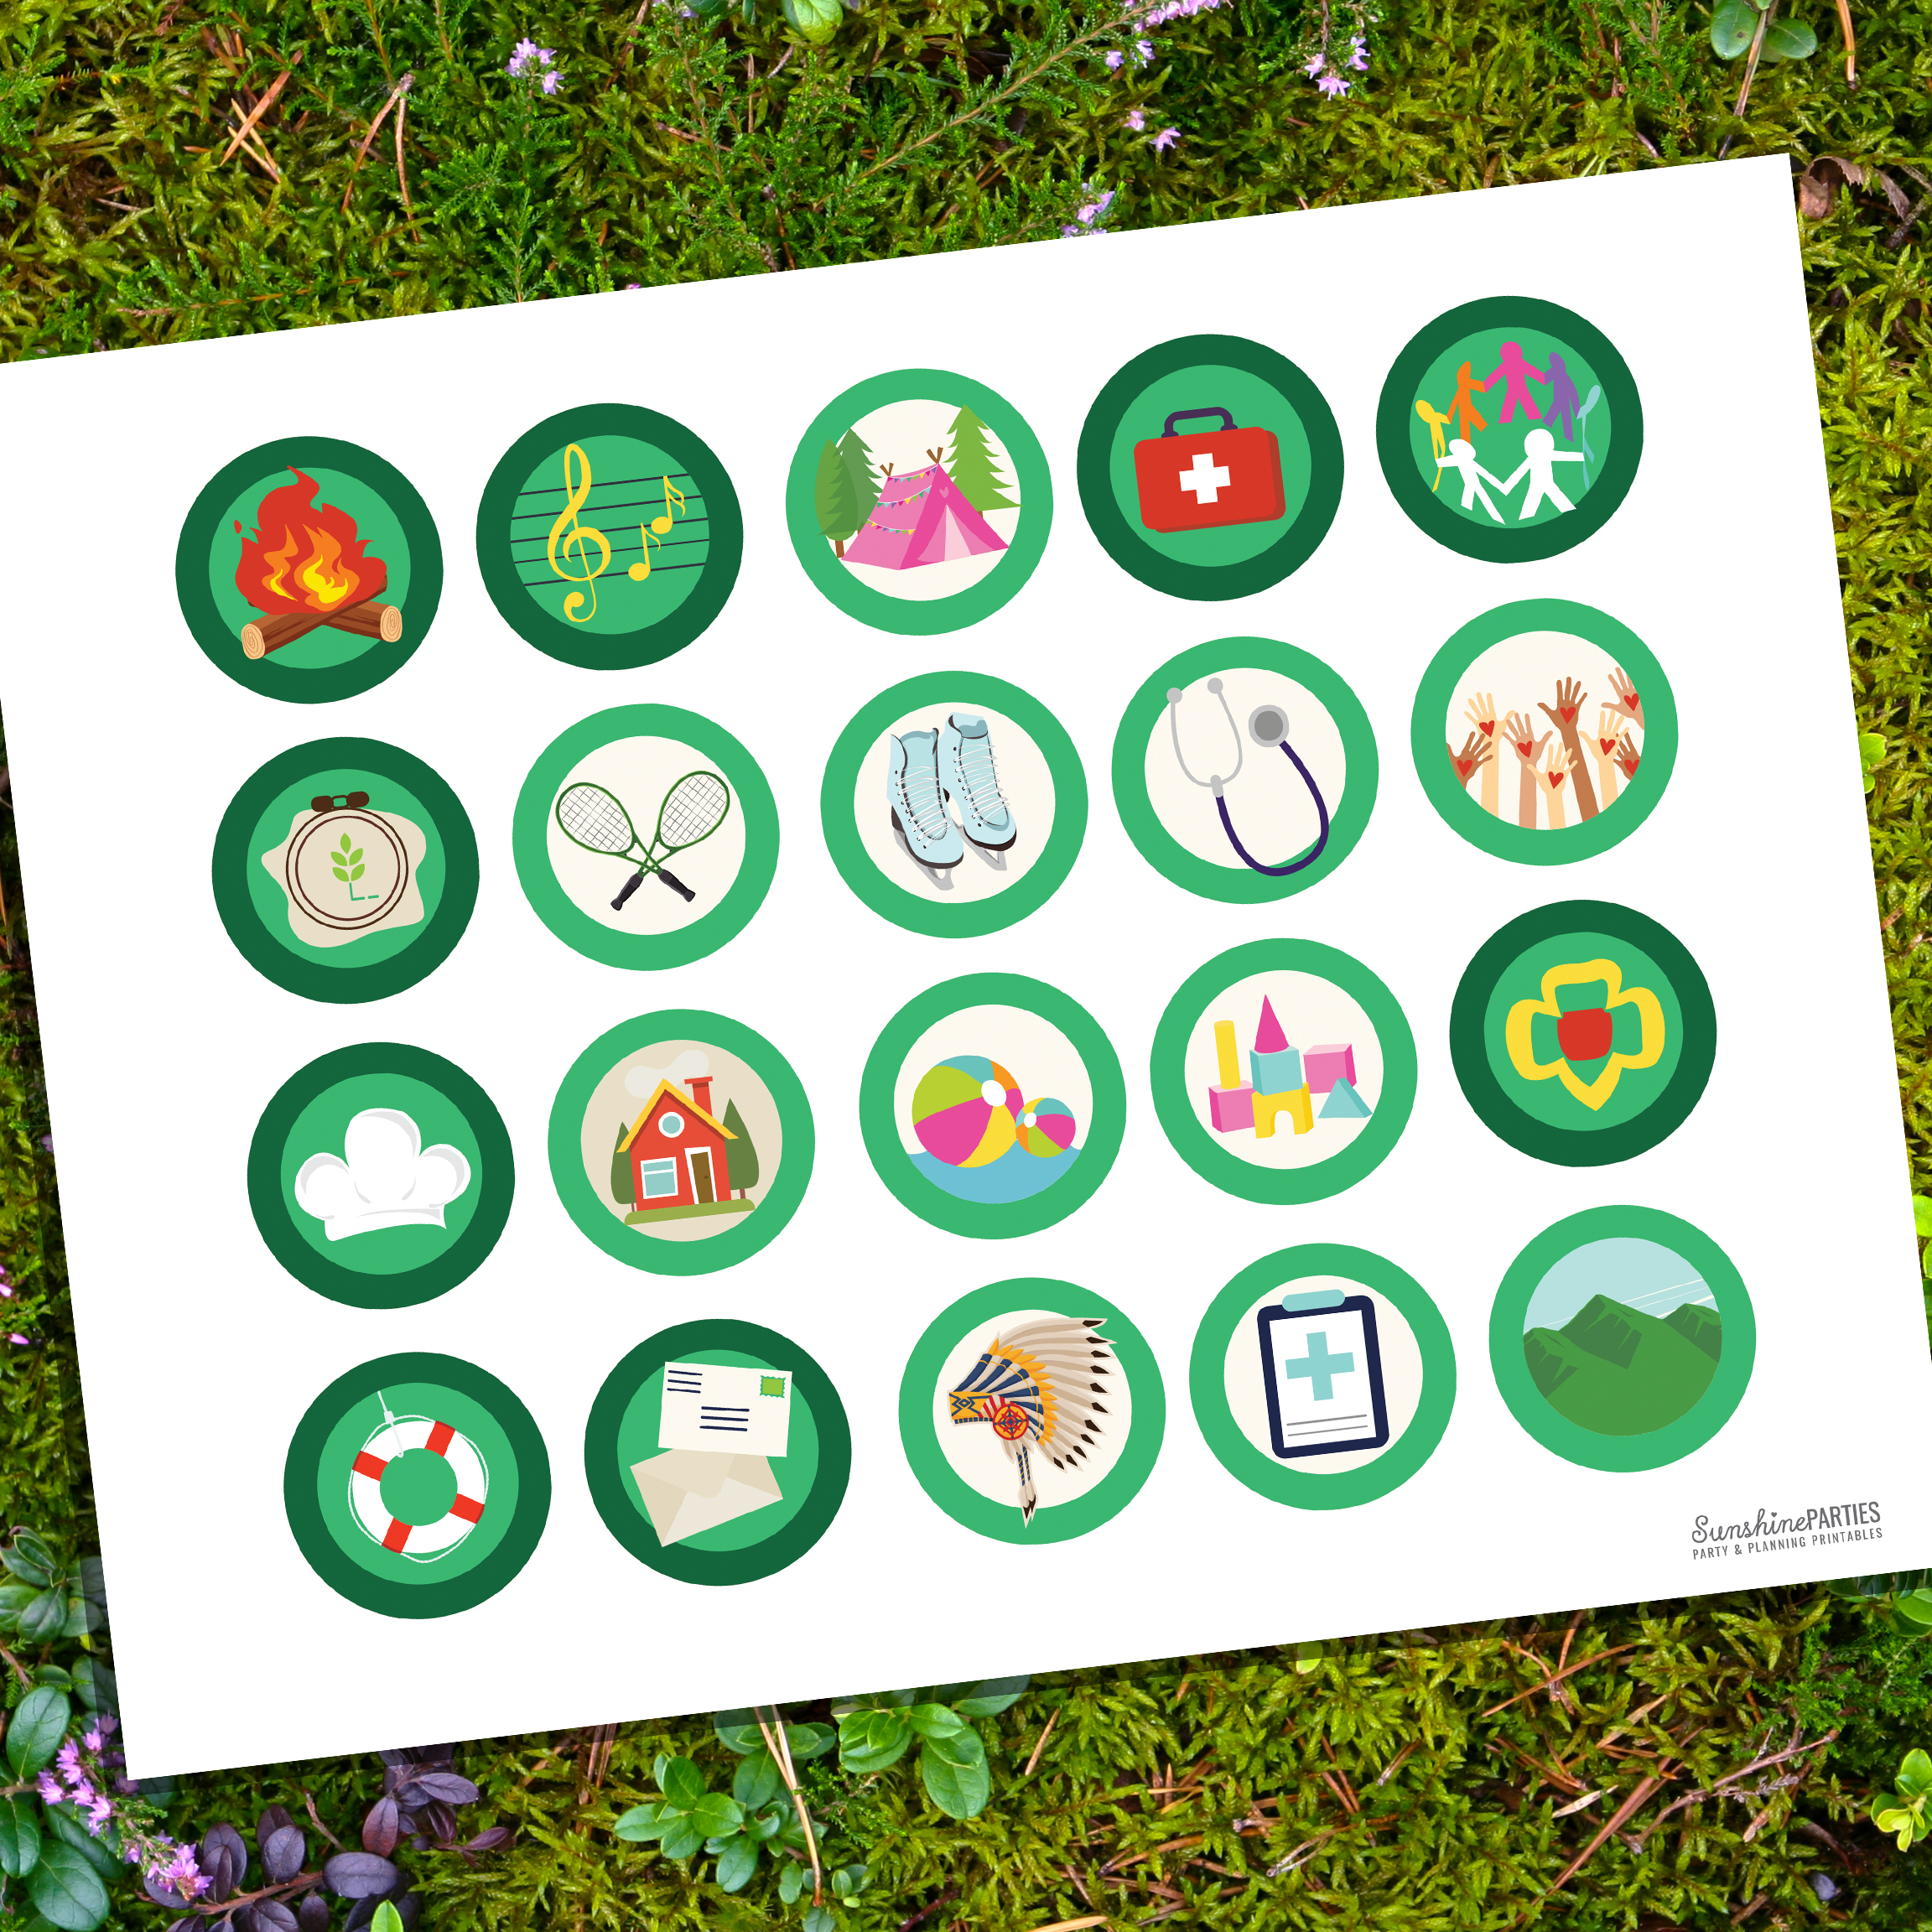 Girl scouts and brownies merit badges - instant download to create your own pin badge!